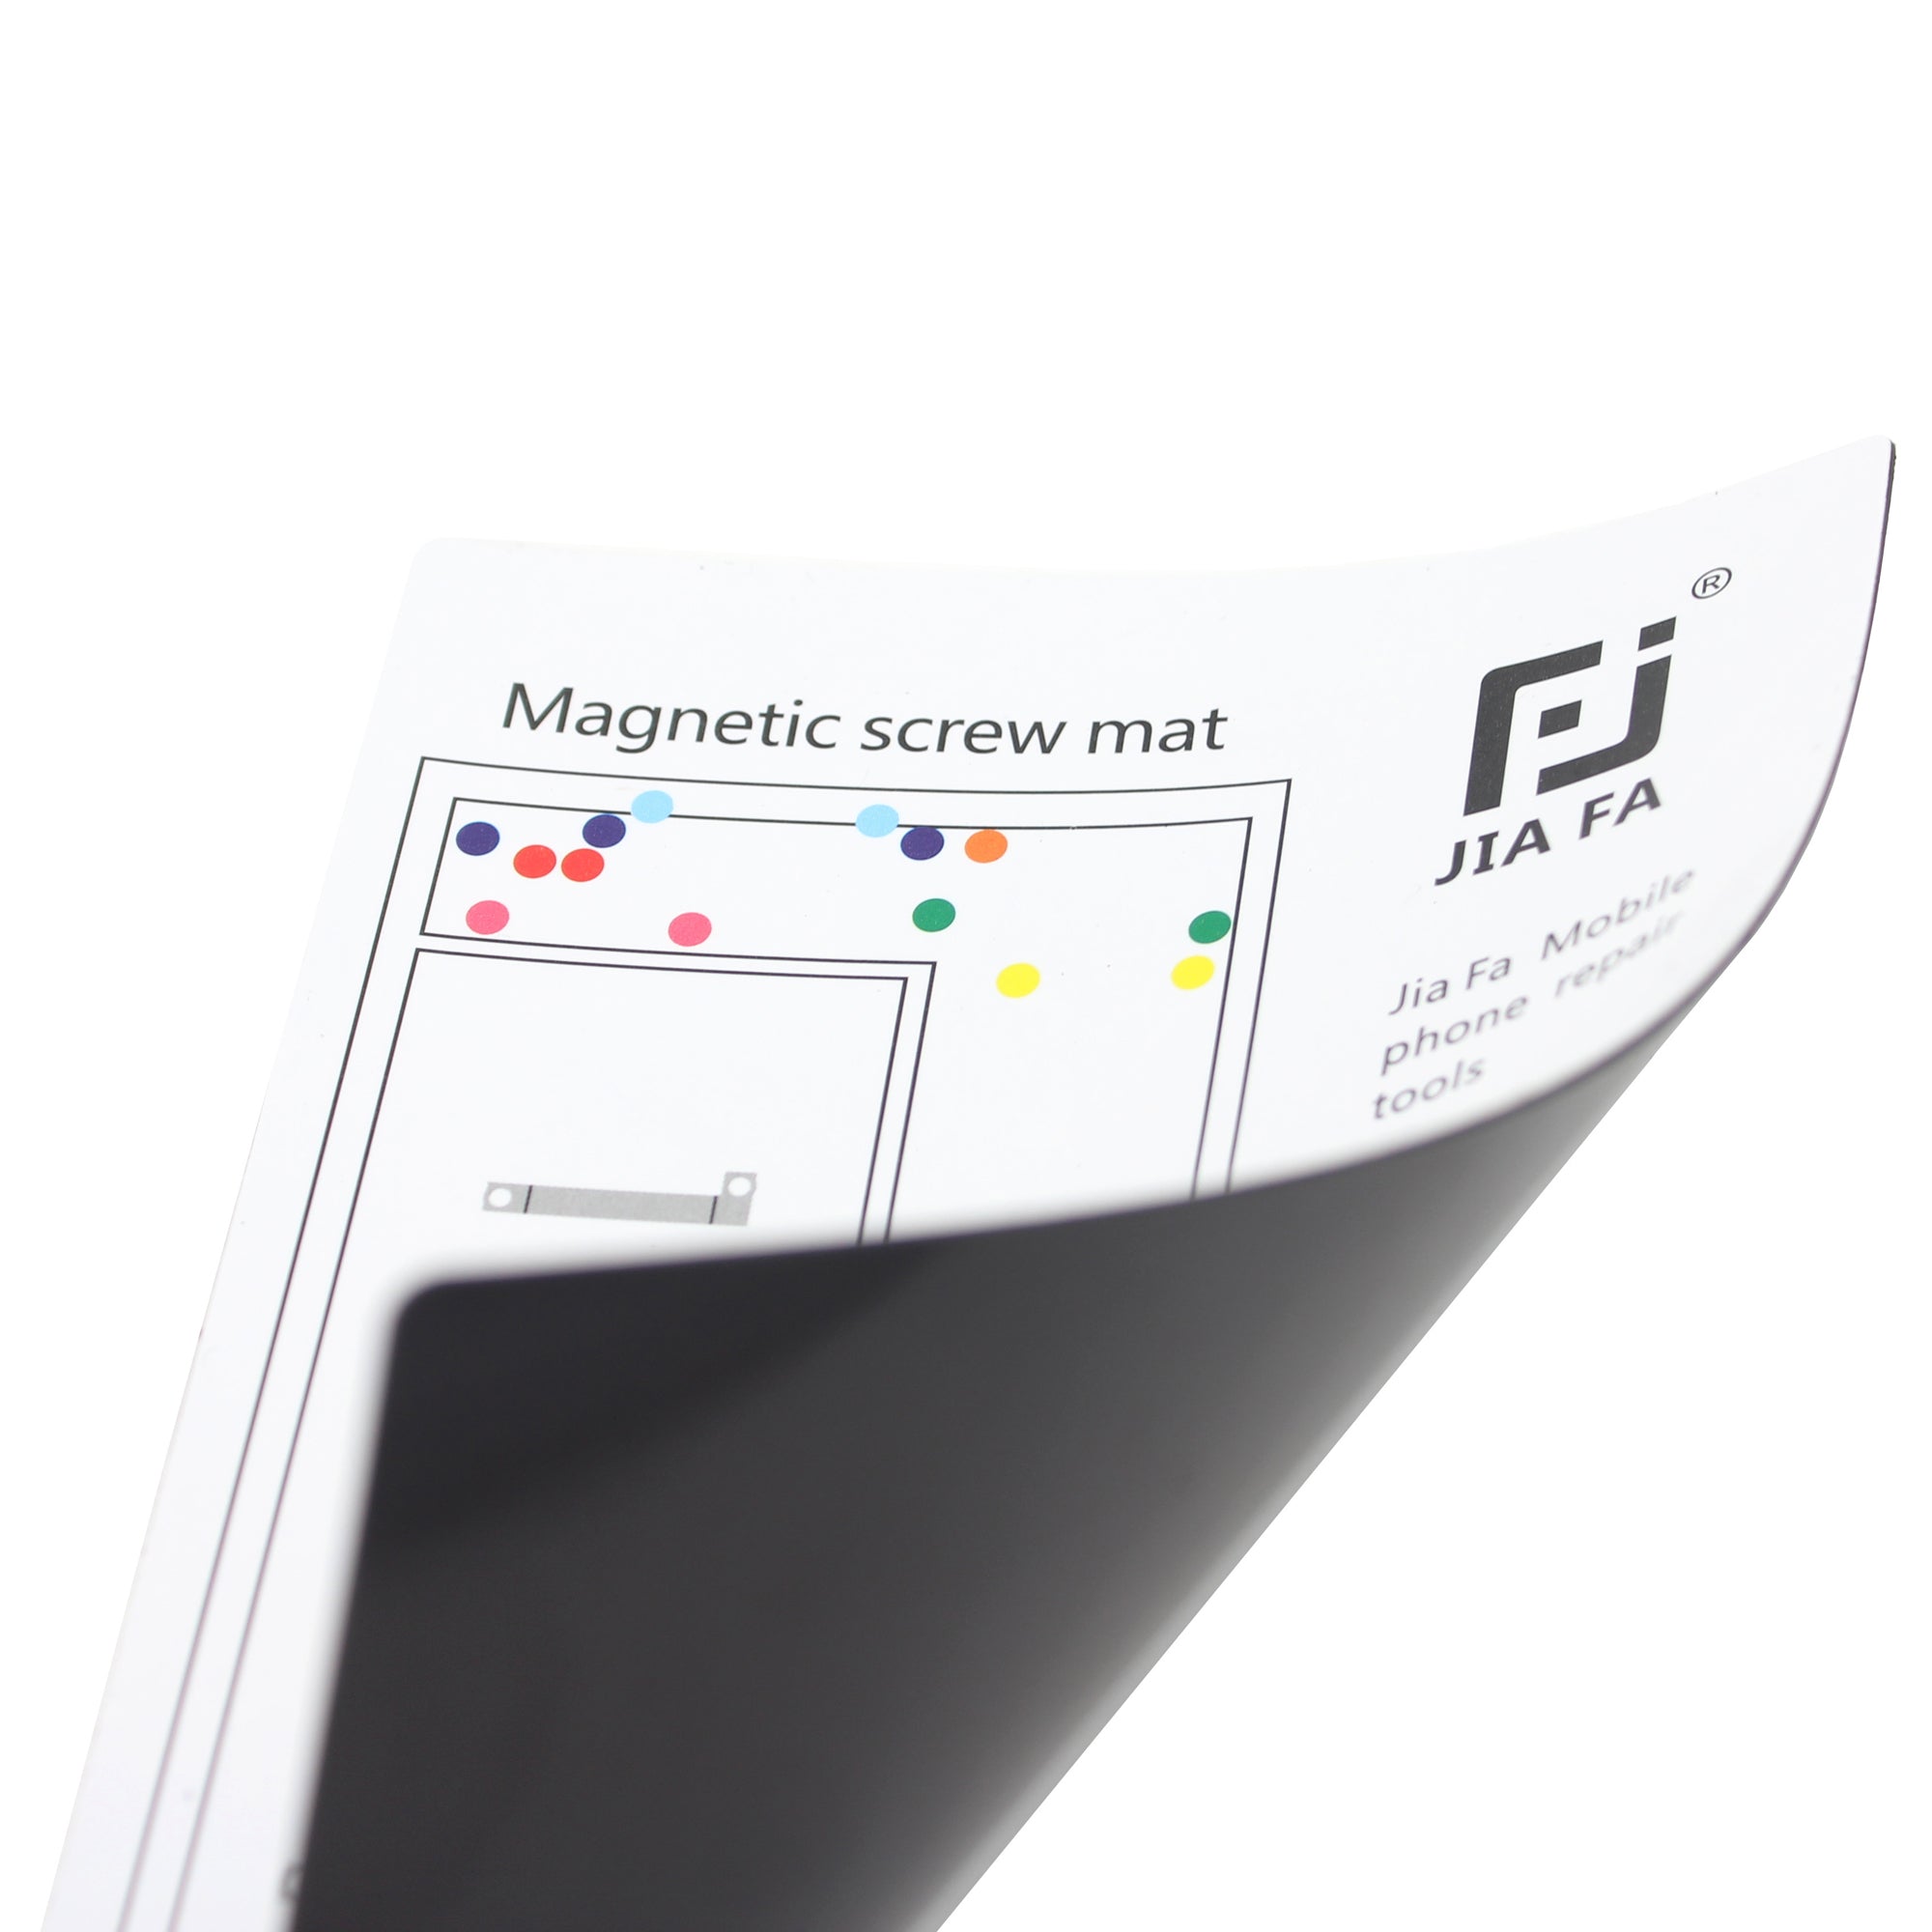 JF-870 Magnetic Screw Mat Maintenance Tool for iPhone 6 4.7-inch